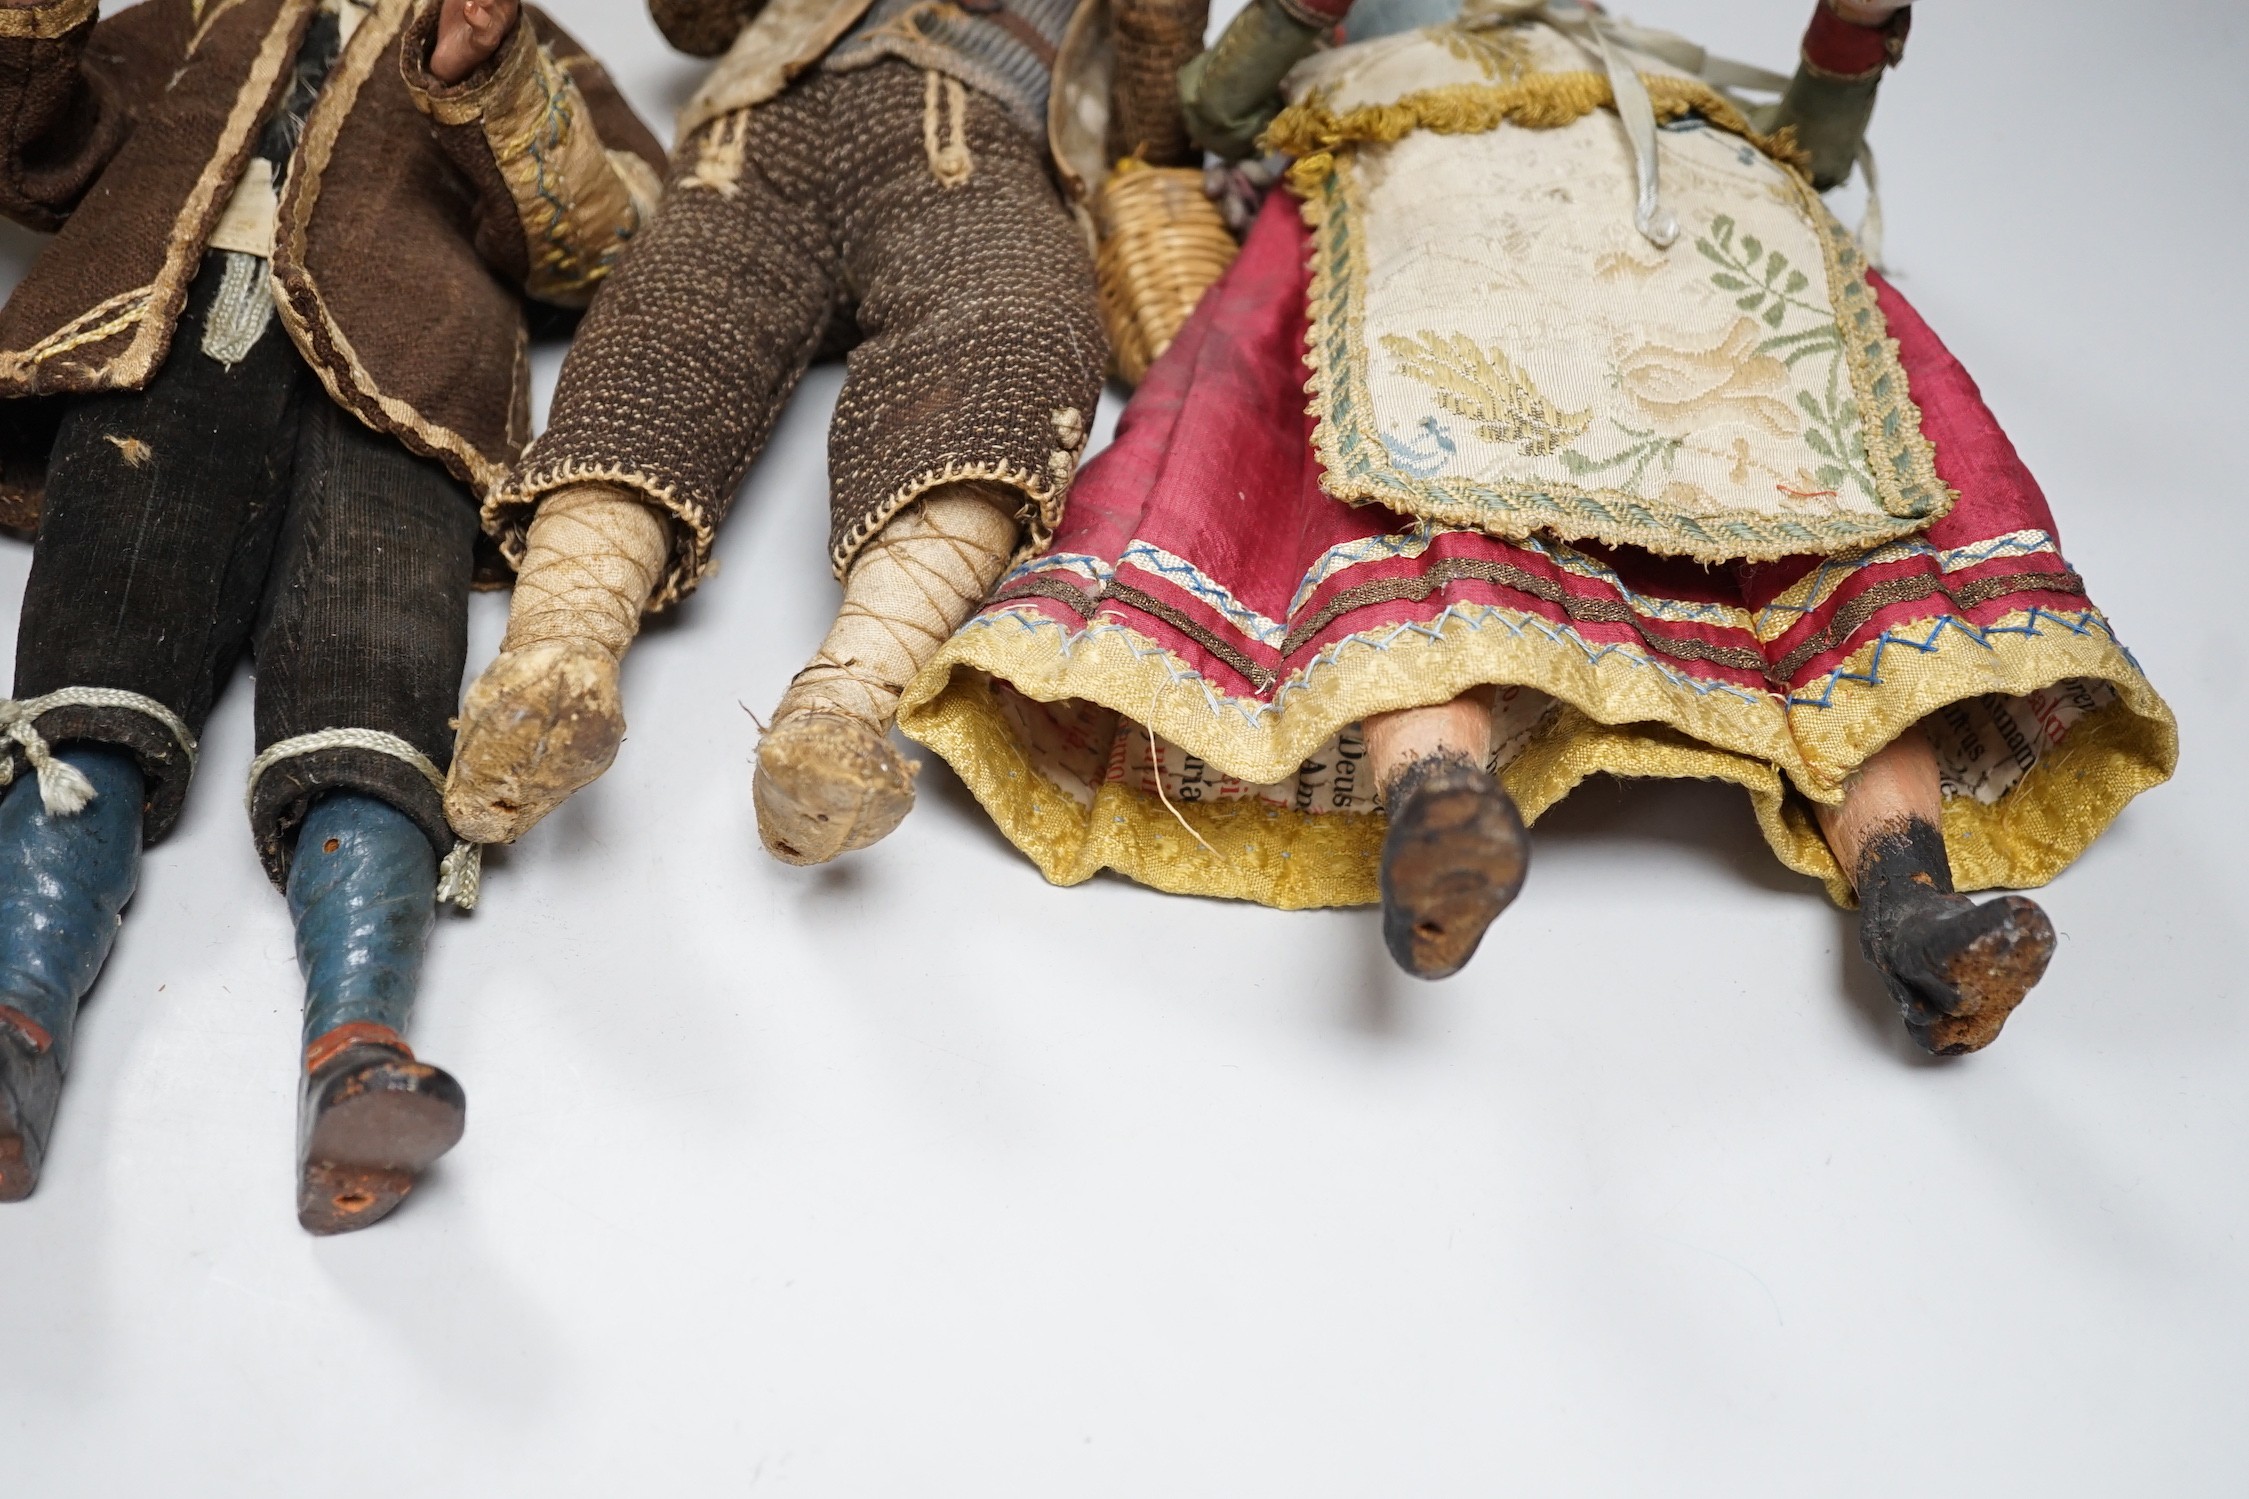 Four 18th/19th century Neapolitan painted wood or terracotta crèche figures, tallest 31.5cm and a - Image 5 of 5